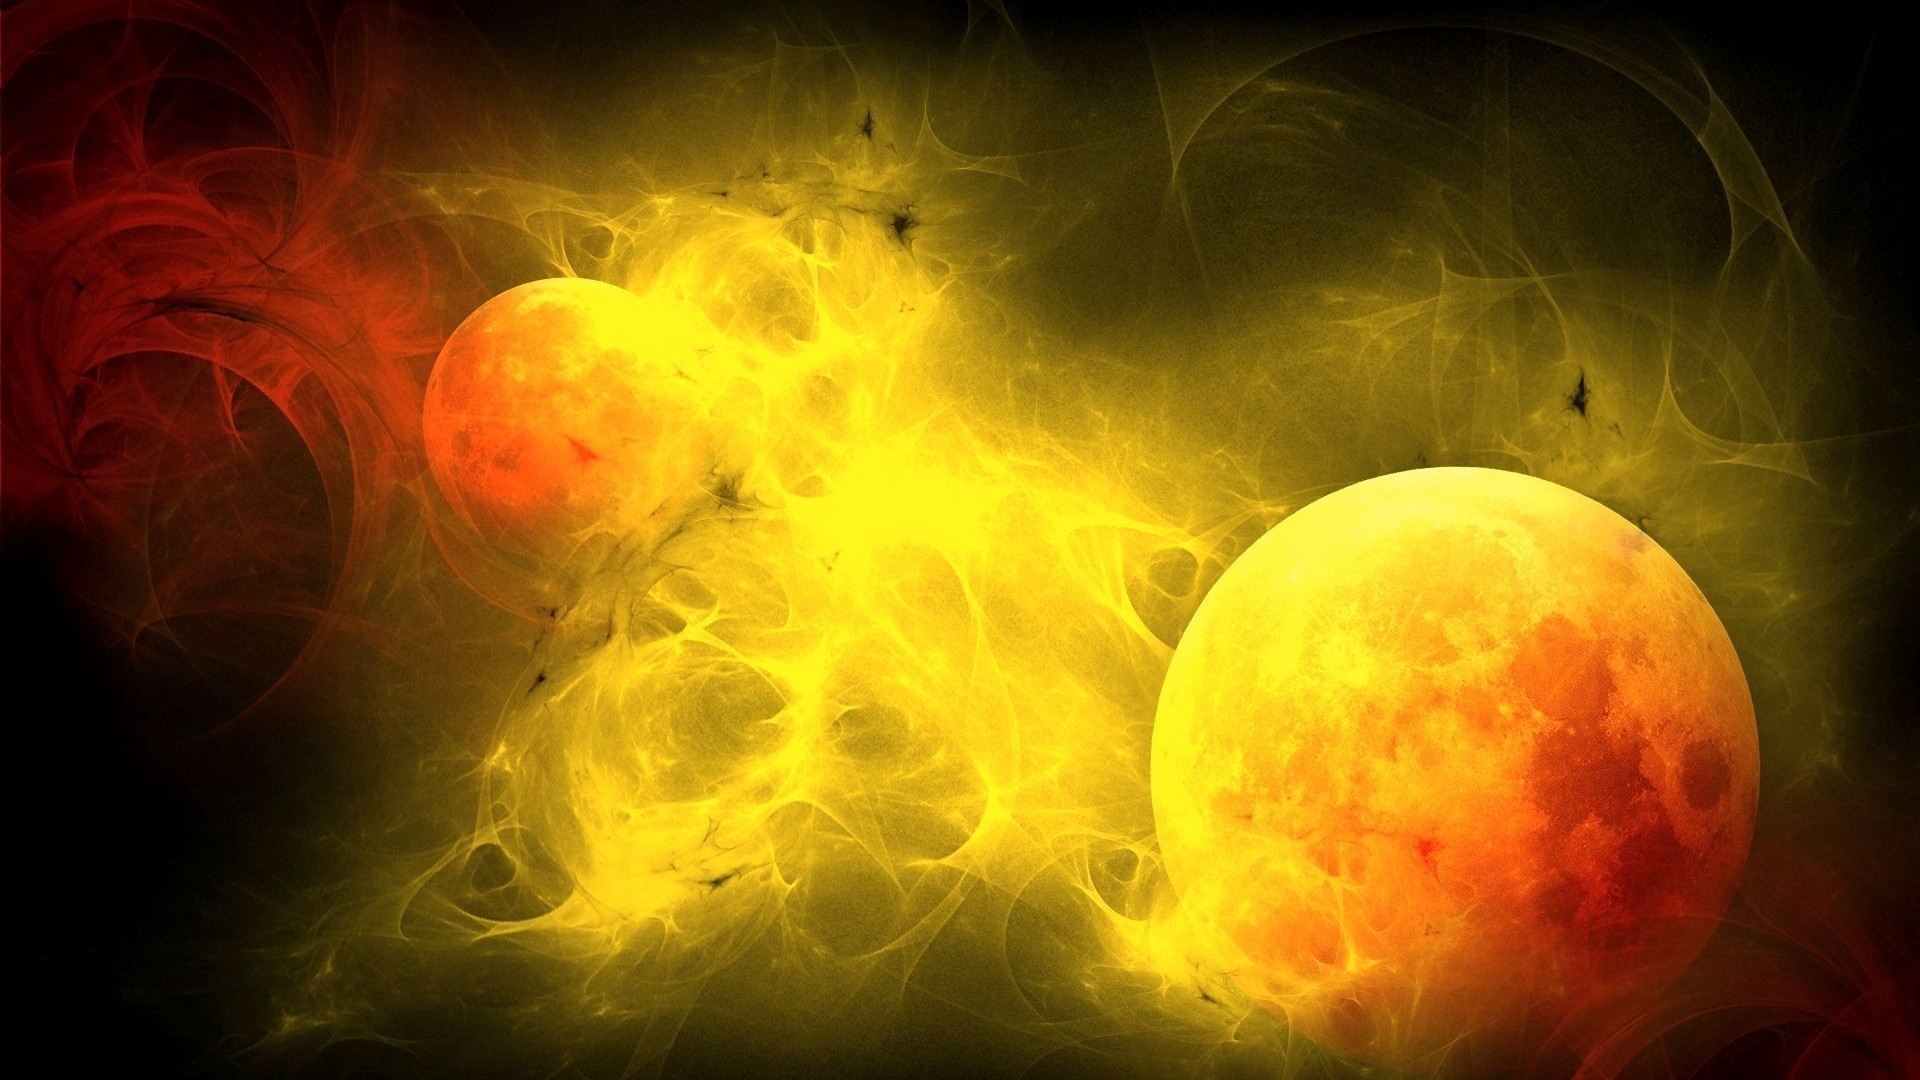 Fire Planets for 1920 x 1080 HDTV 1080p resolution